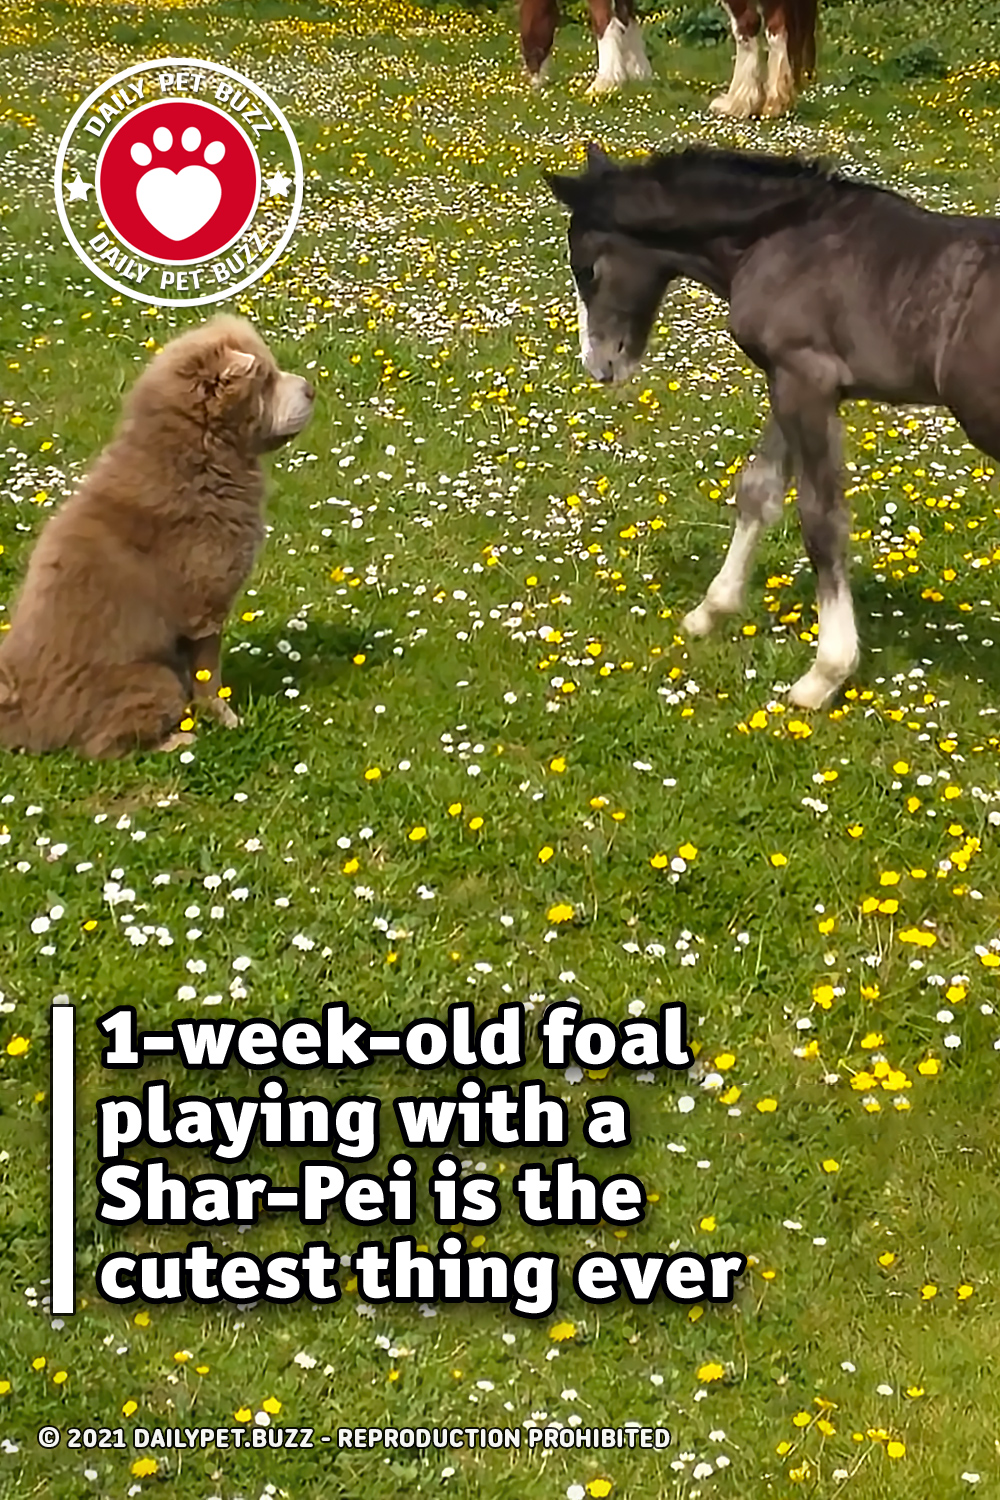 1-week-old foal playing with a Shar-Pei is the cutest thing ever